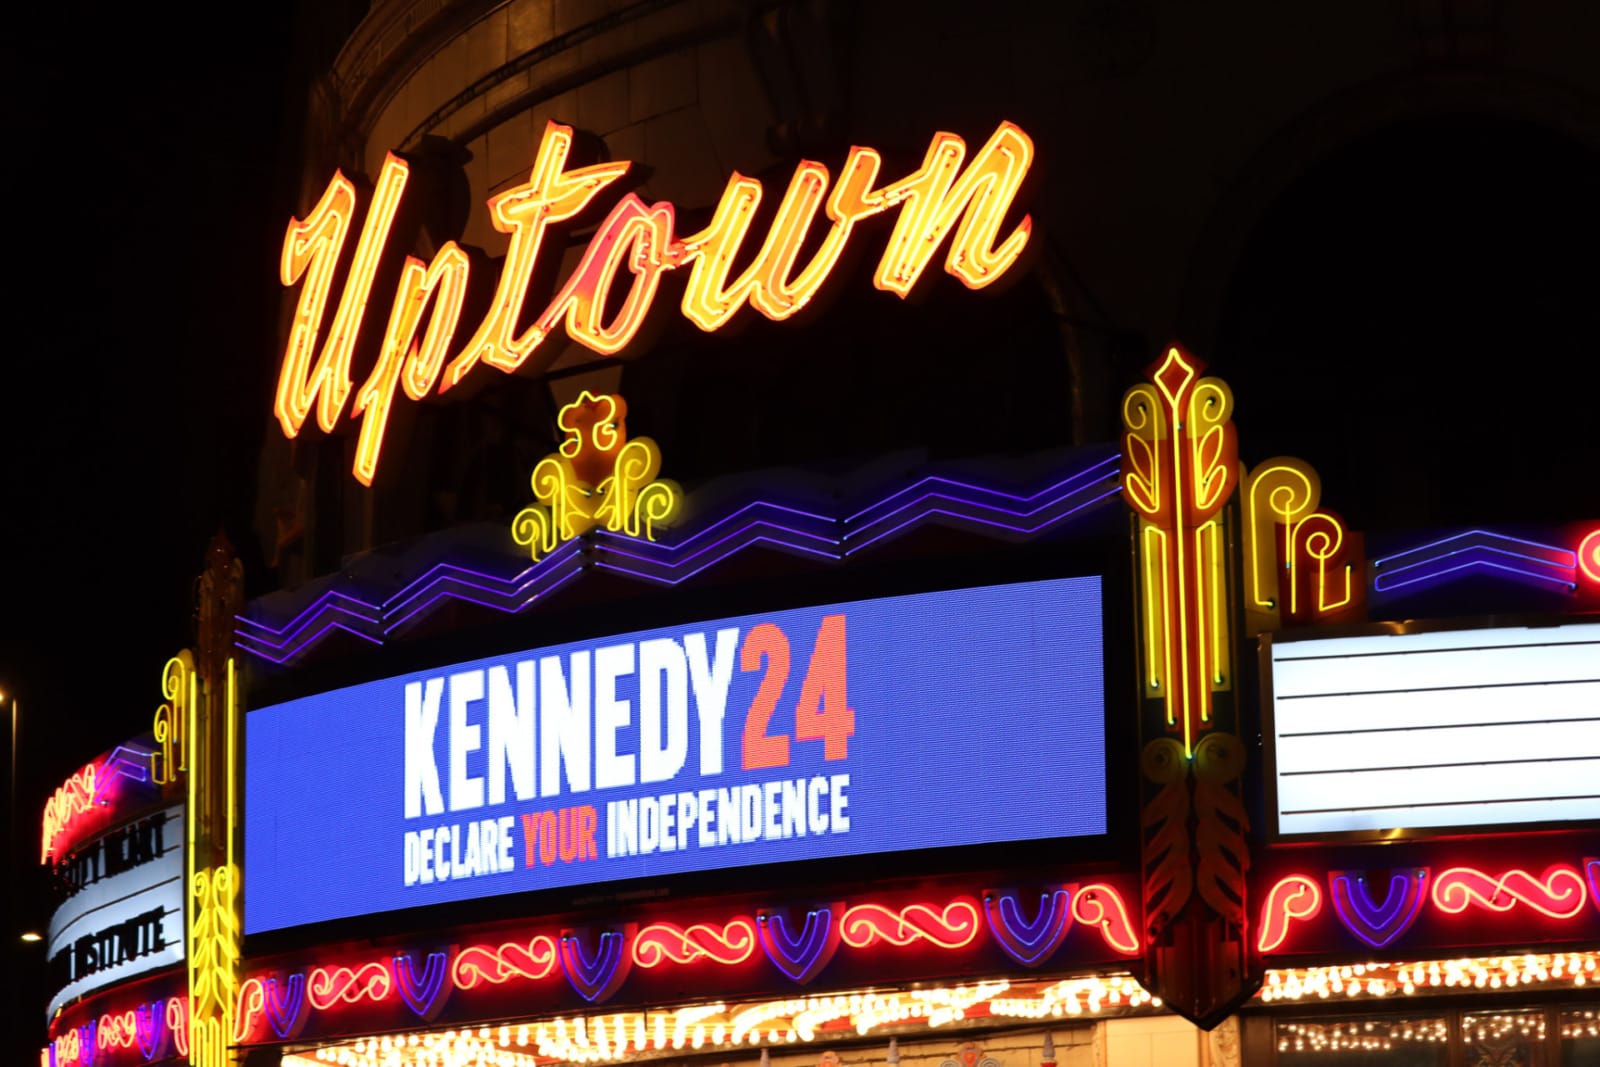 Neon lights on a building read "Uptown" an electronic marquee reads "Kennedy 24 Declare your Independence"